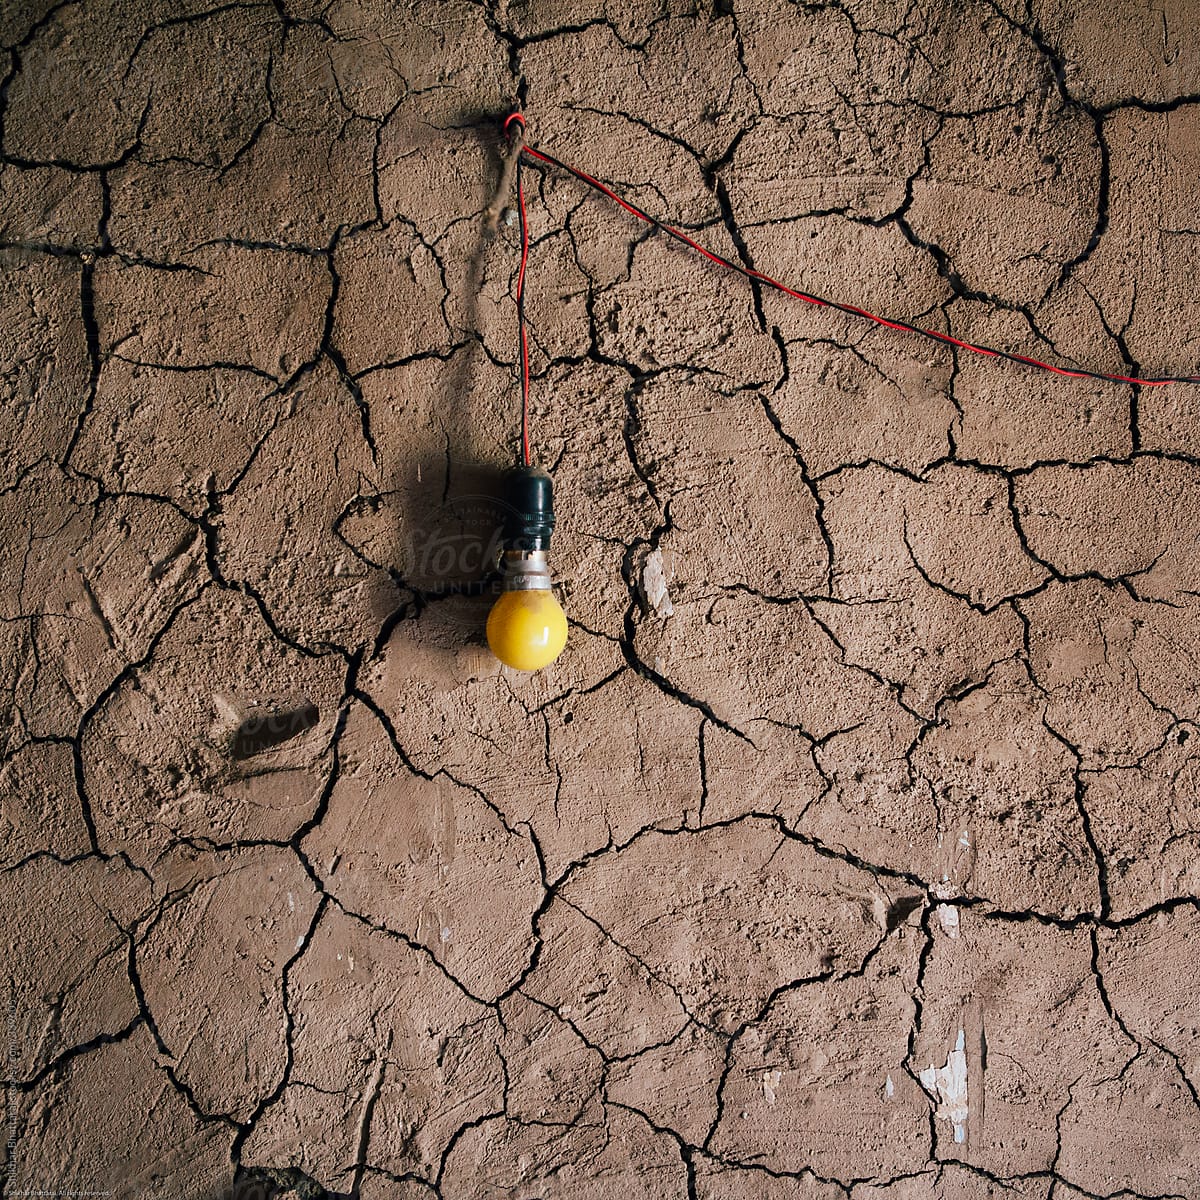 Abstract shot of light bulb on a cracked crumpled mud wall.